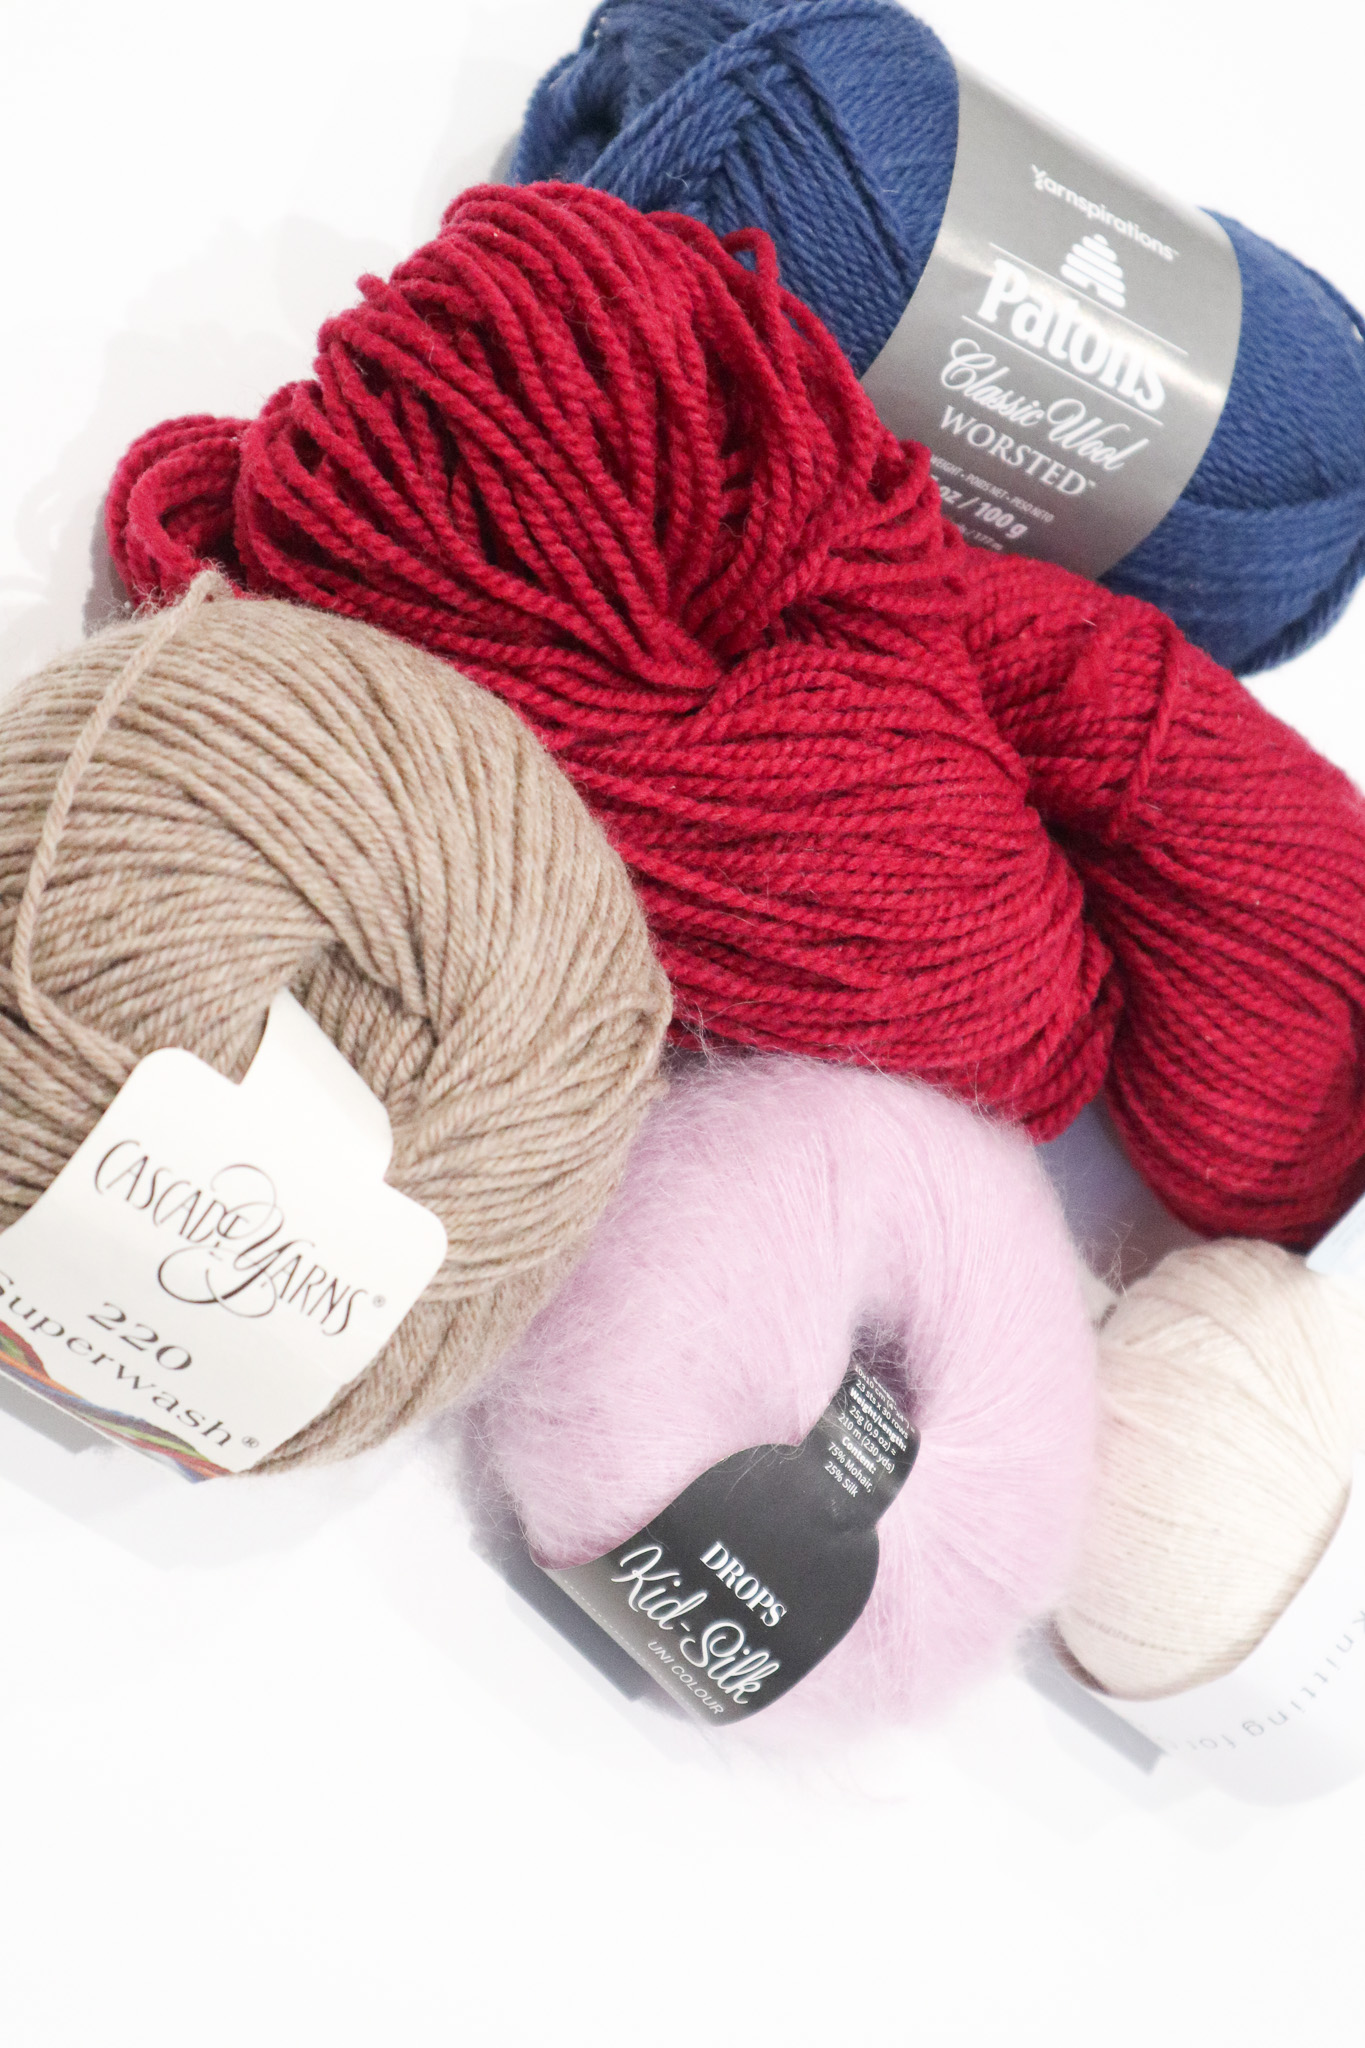 A Beginner Knitters Complete Guide to Yarn Types & Yarn Weights